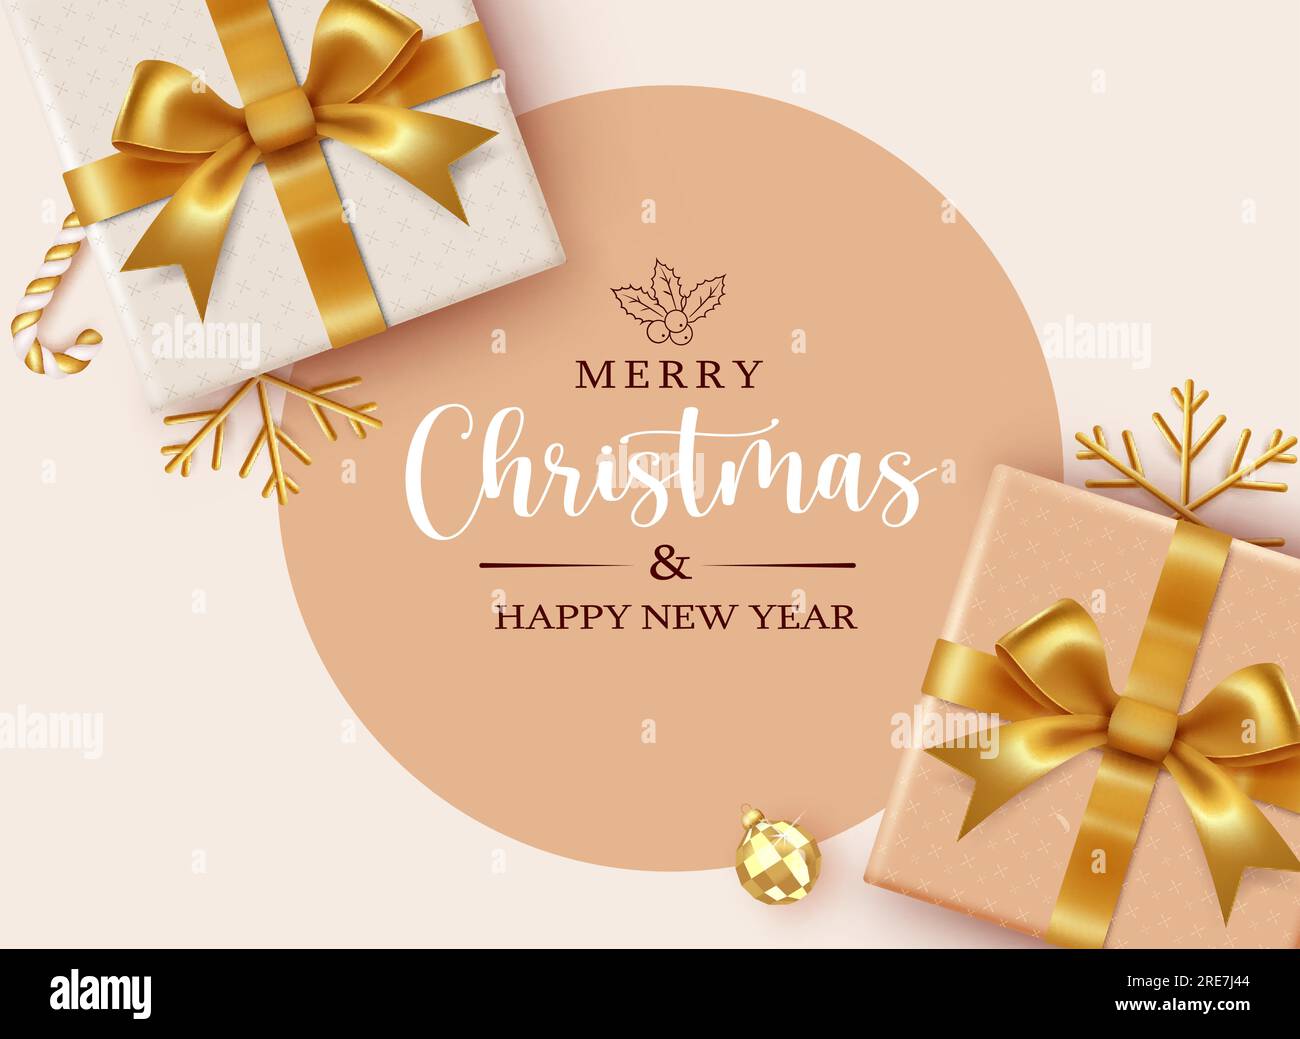 Merry christmas text vector template design. Christmas gift boxes and snowflakes elements in gold elegant color ornaments for card decoration. Vector Stock Vector